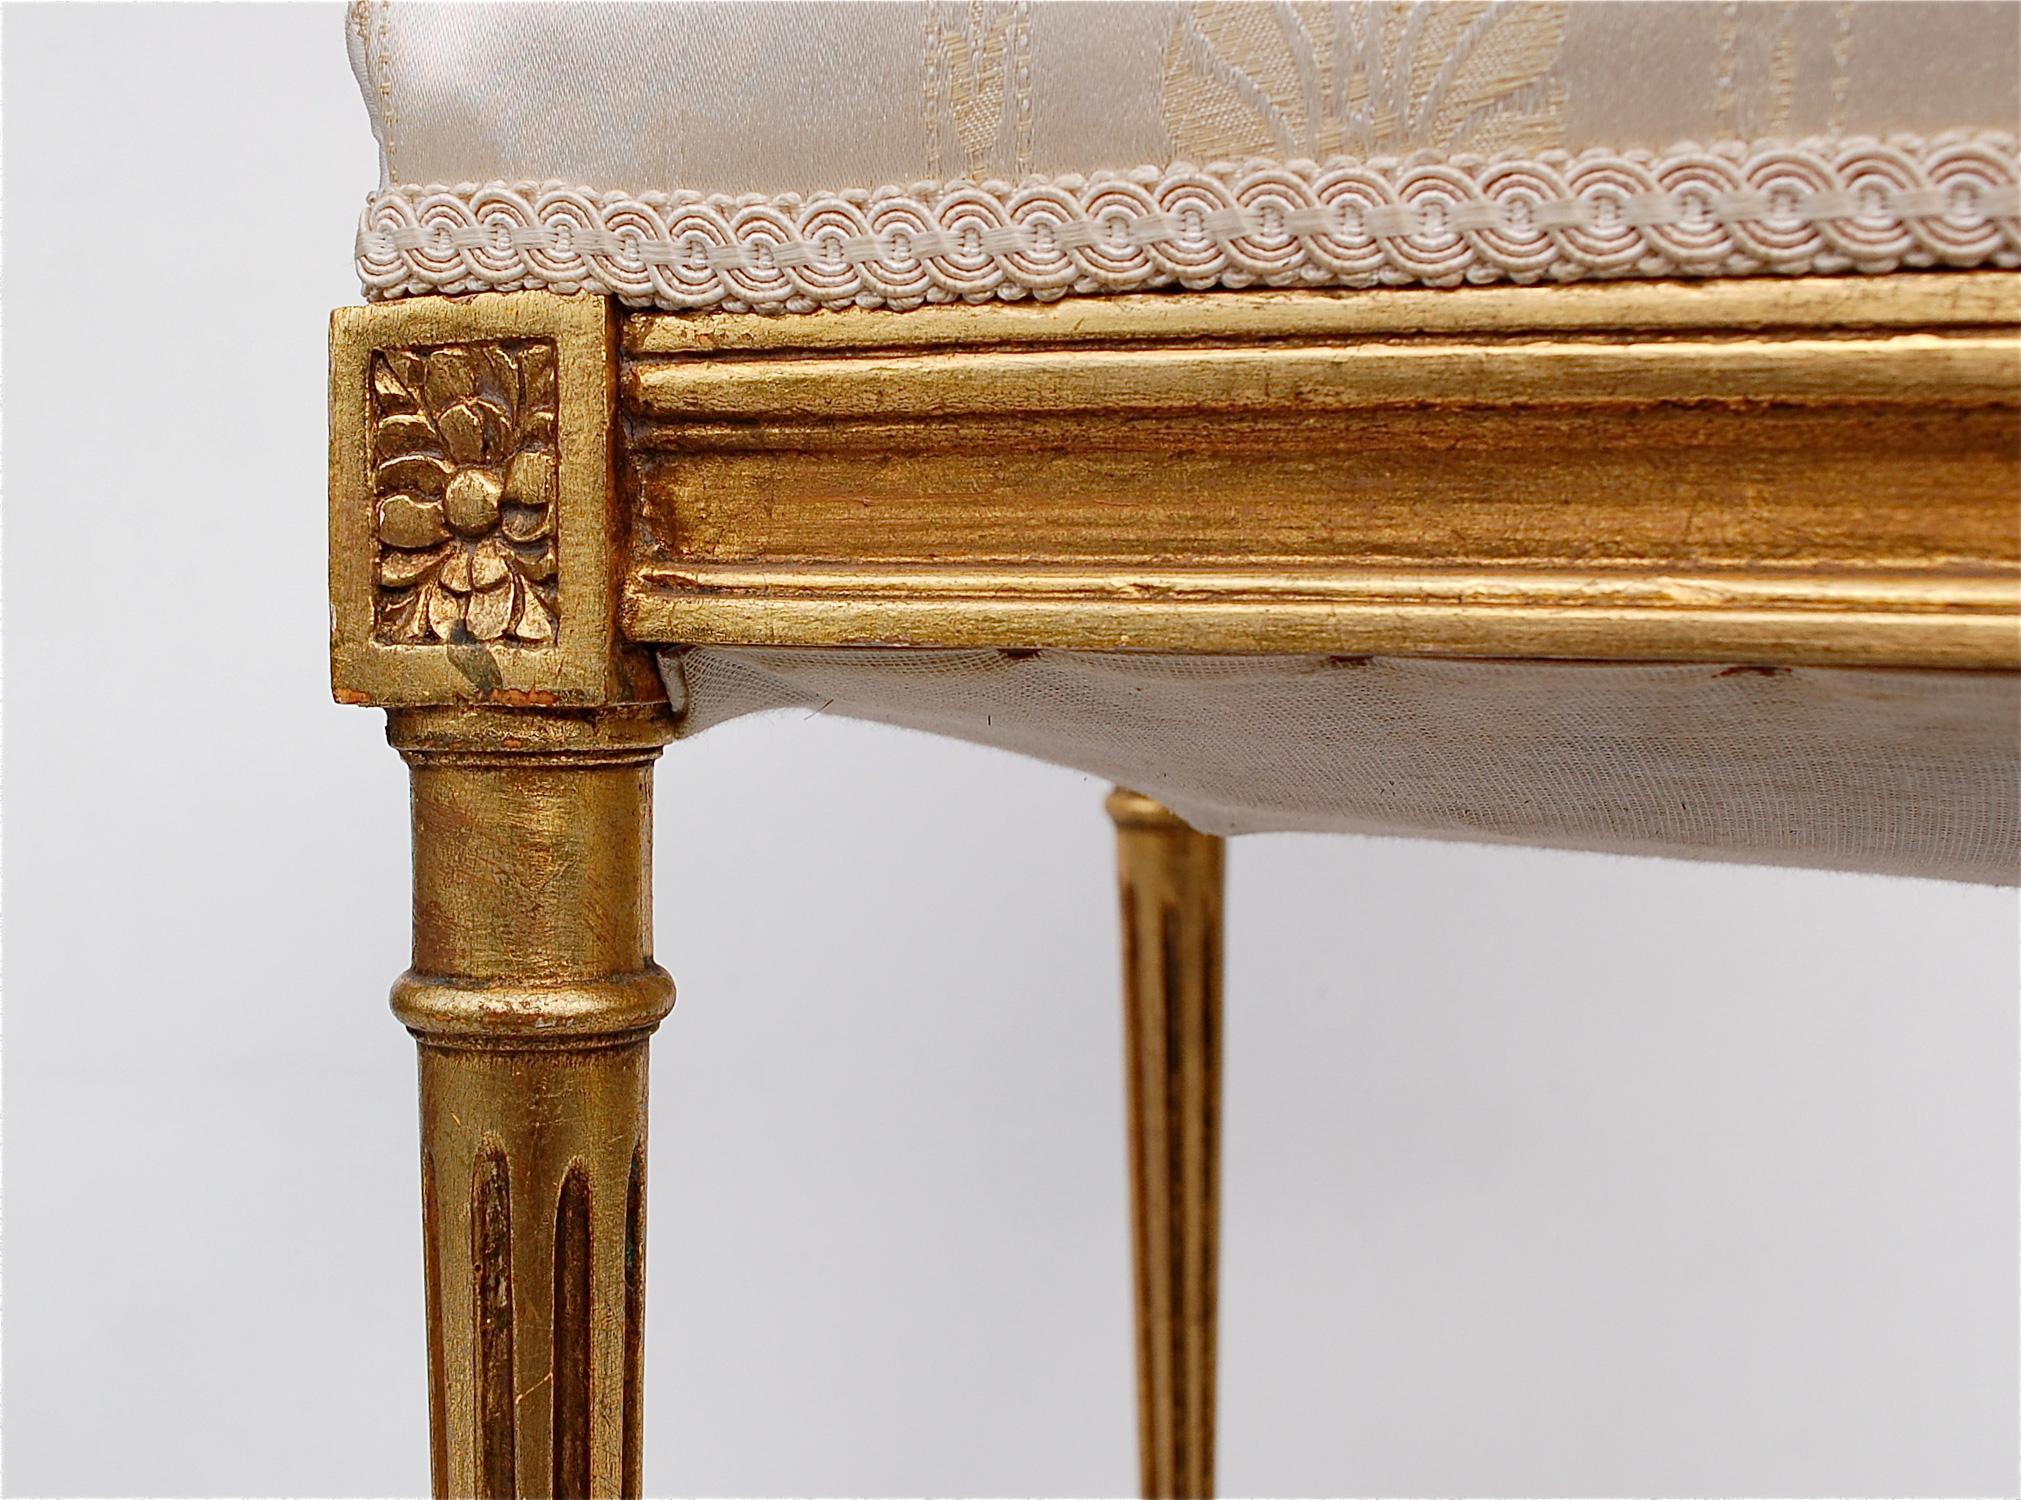 French Empire Style Giltwood Chair, Early 20th Century, France (20. Jahrhundert)